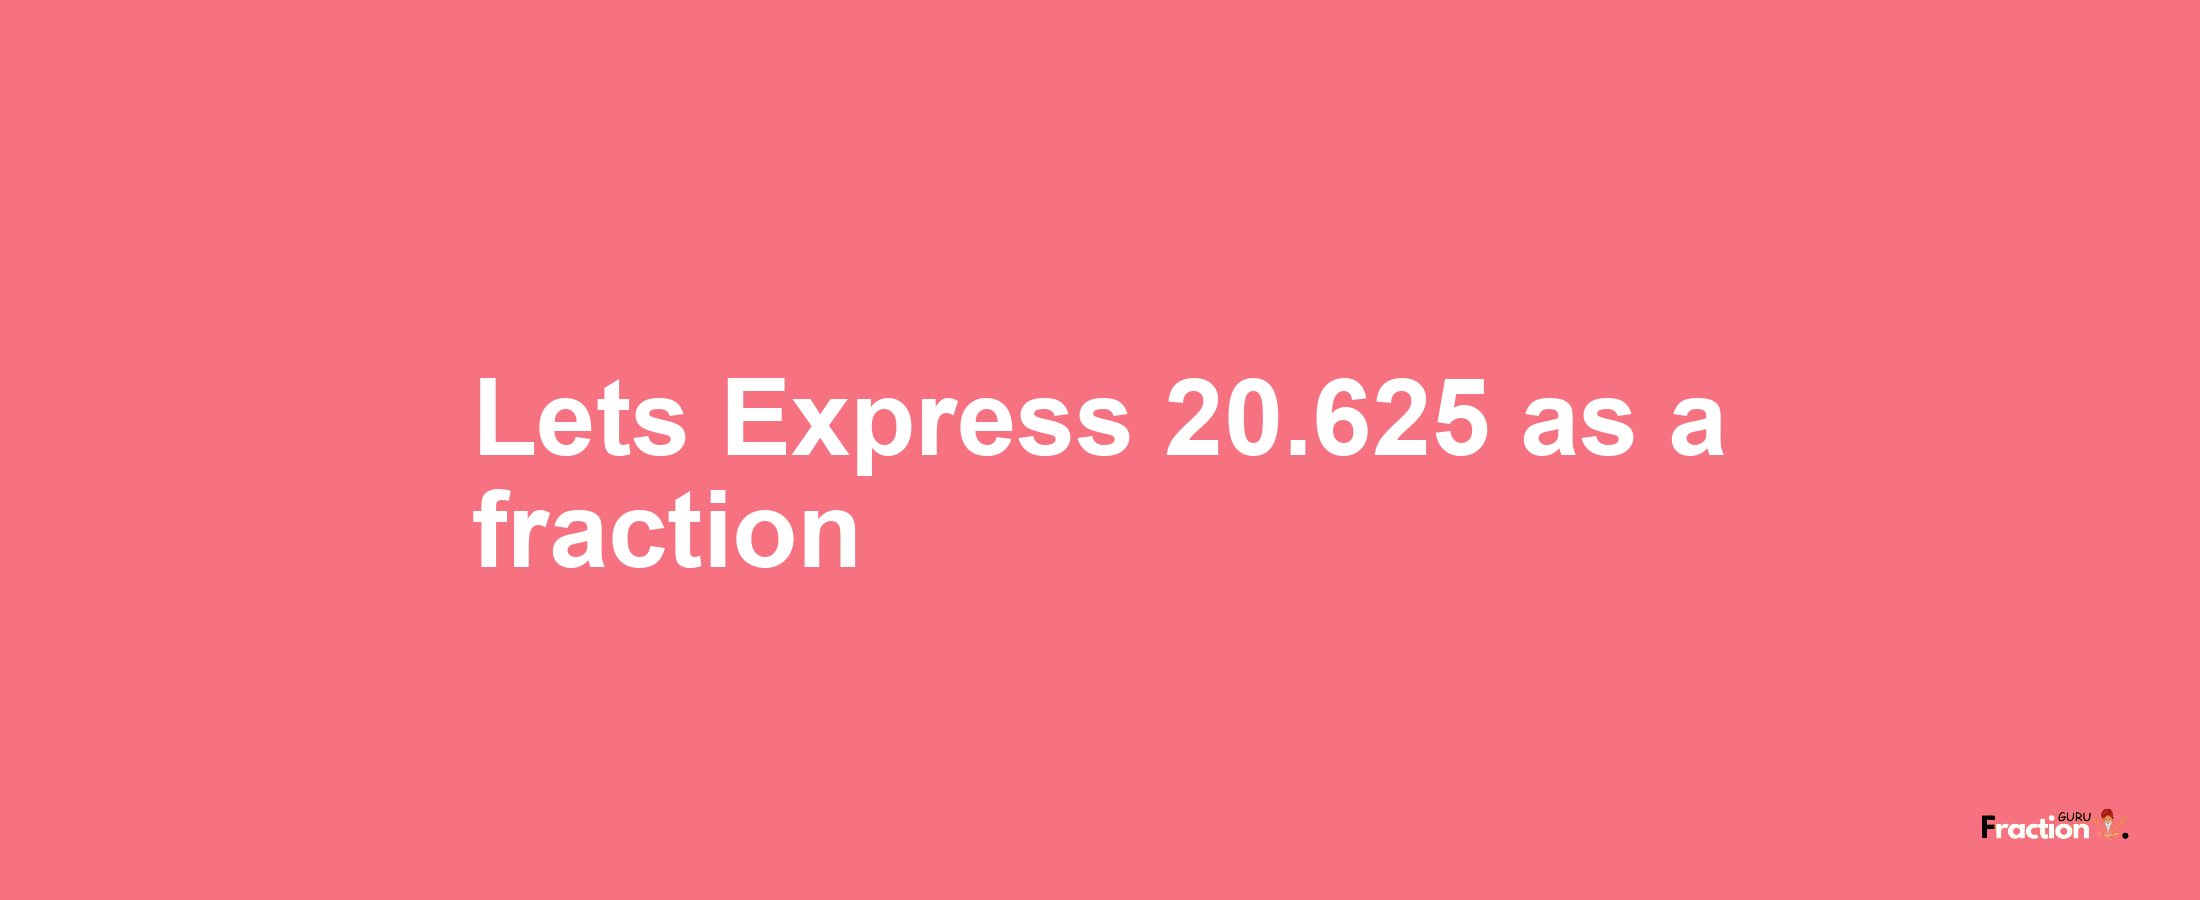 Lets Express 20.625 as afraction